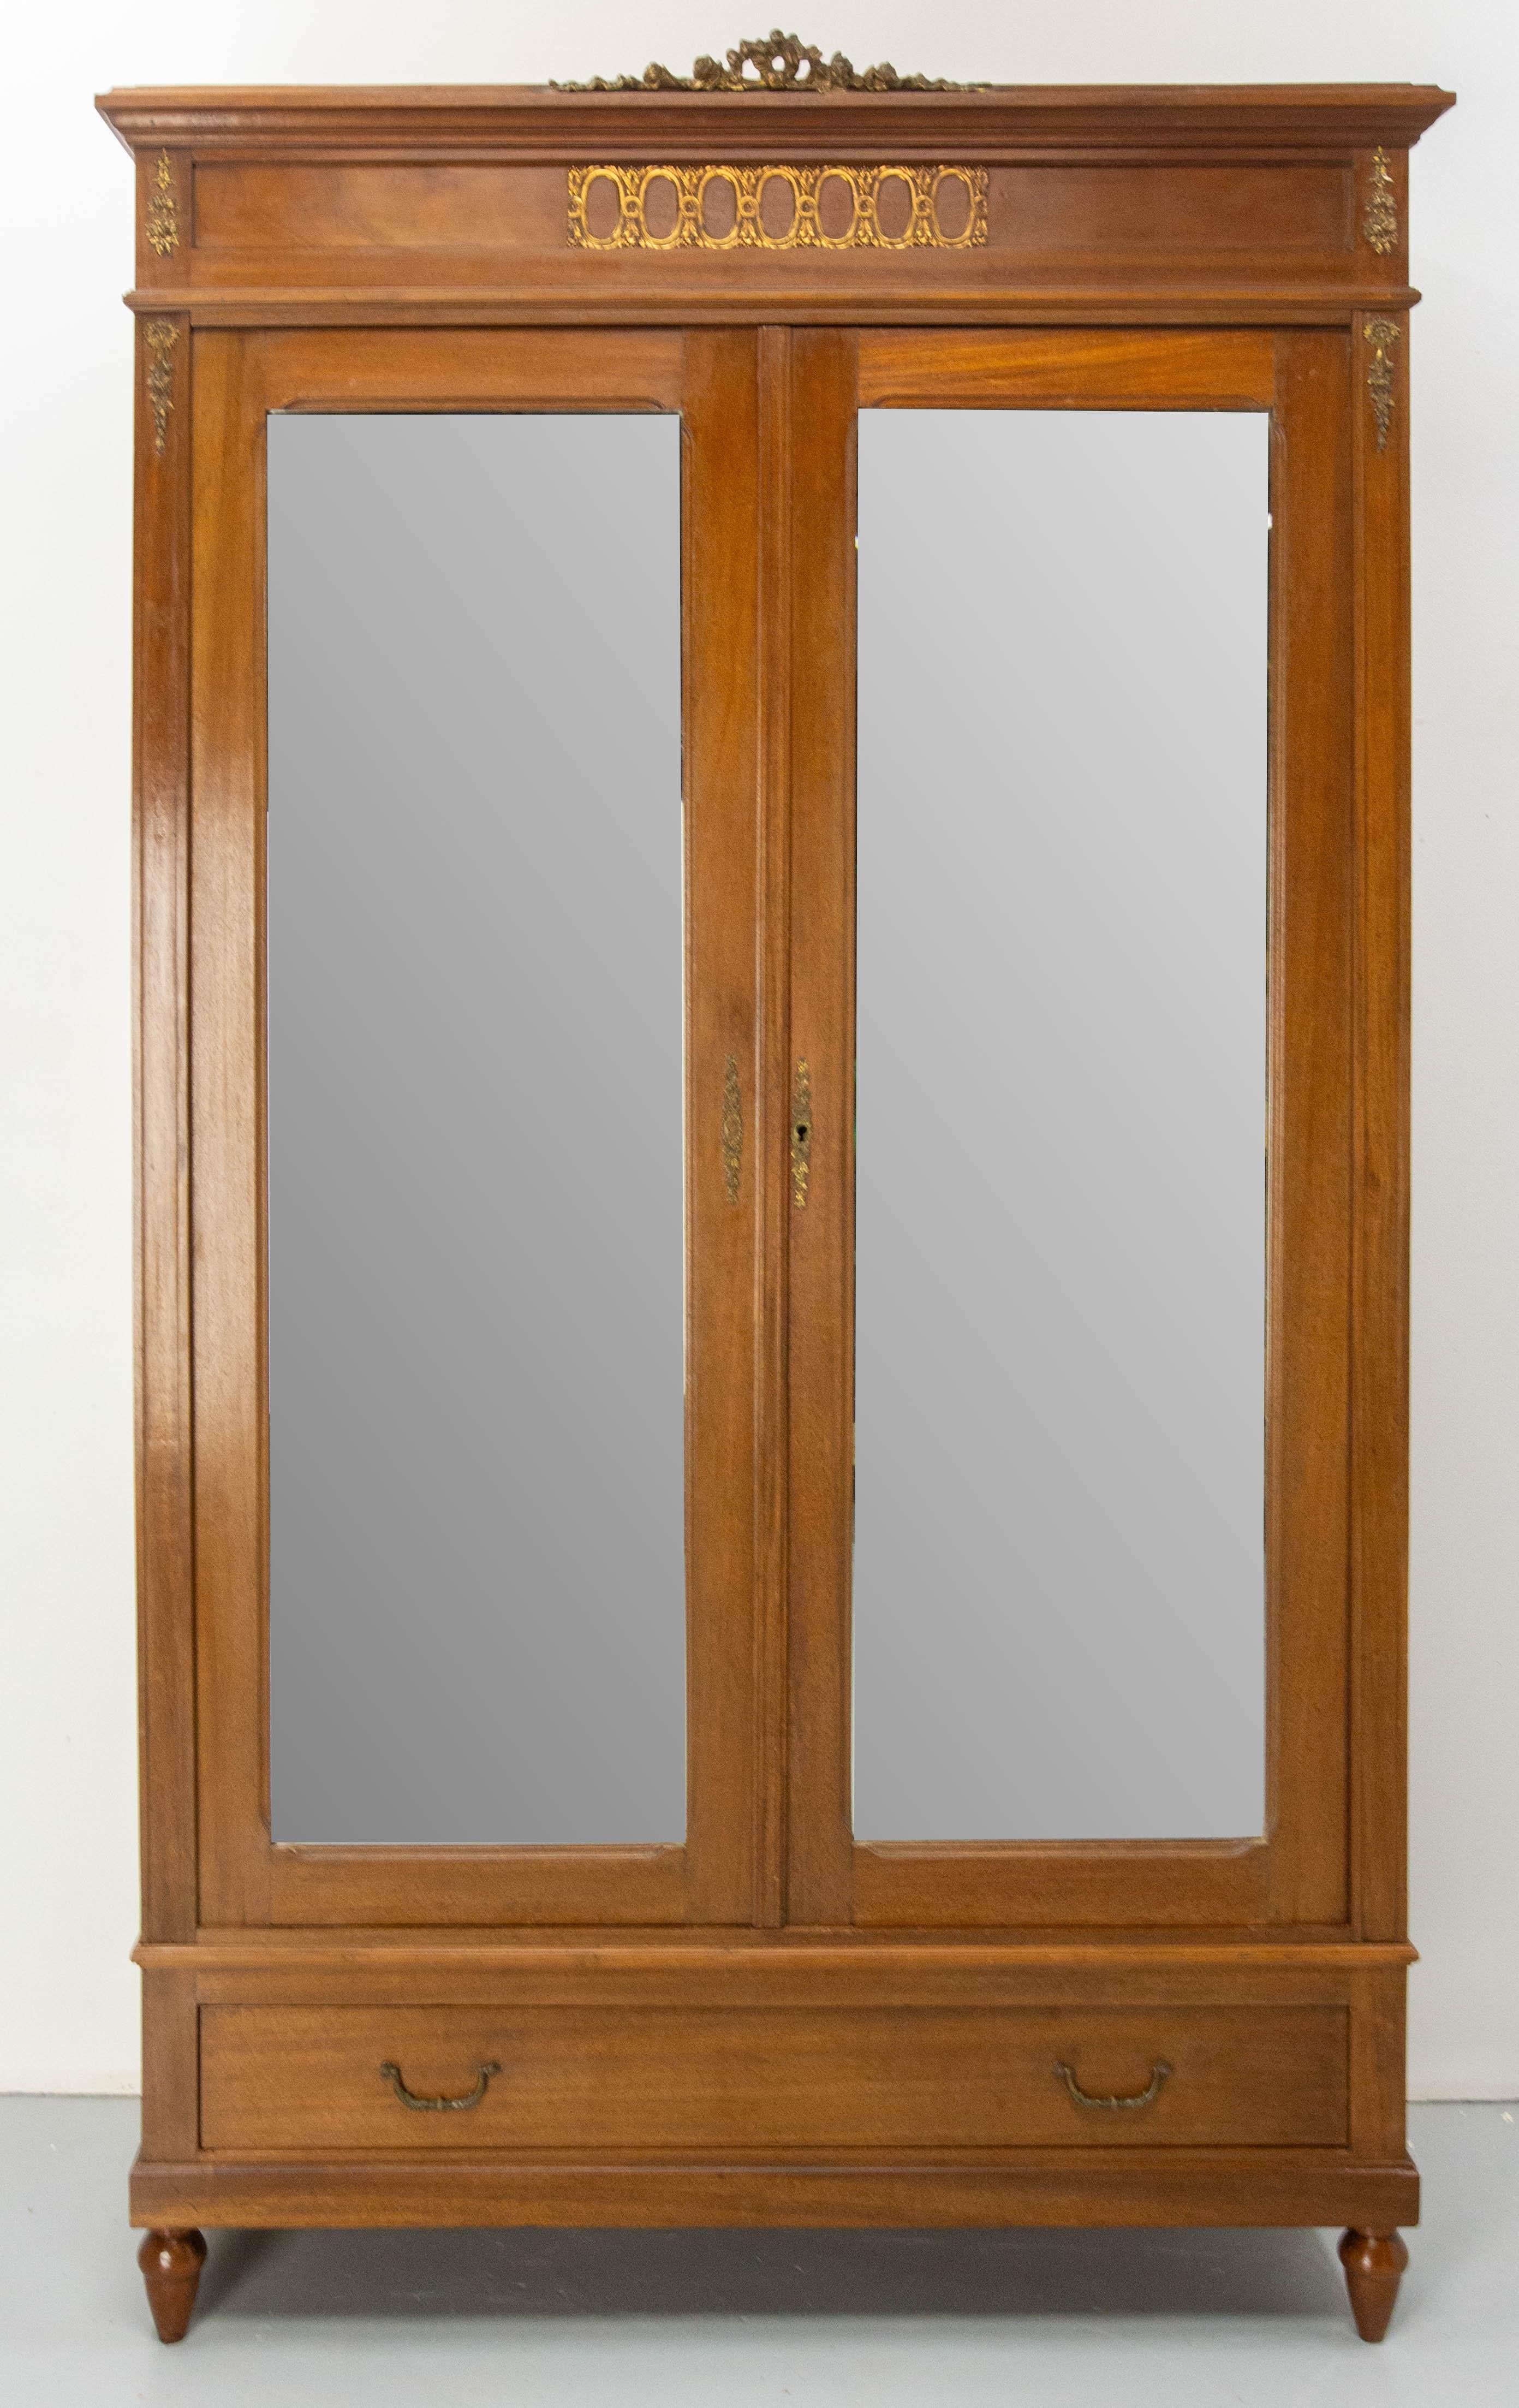 French Armoire with two beveled mirrors
Revival Louis 16 style iroko veneer.
Finished interior with Shelves and two little drawers.
Two doors and one large drawer.
Made circa 1900.
Good condition, with traces of the past on the sides (please see